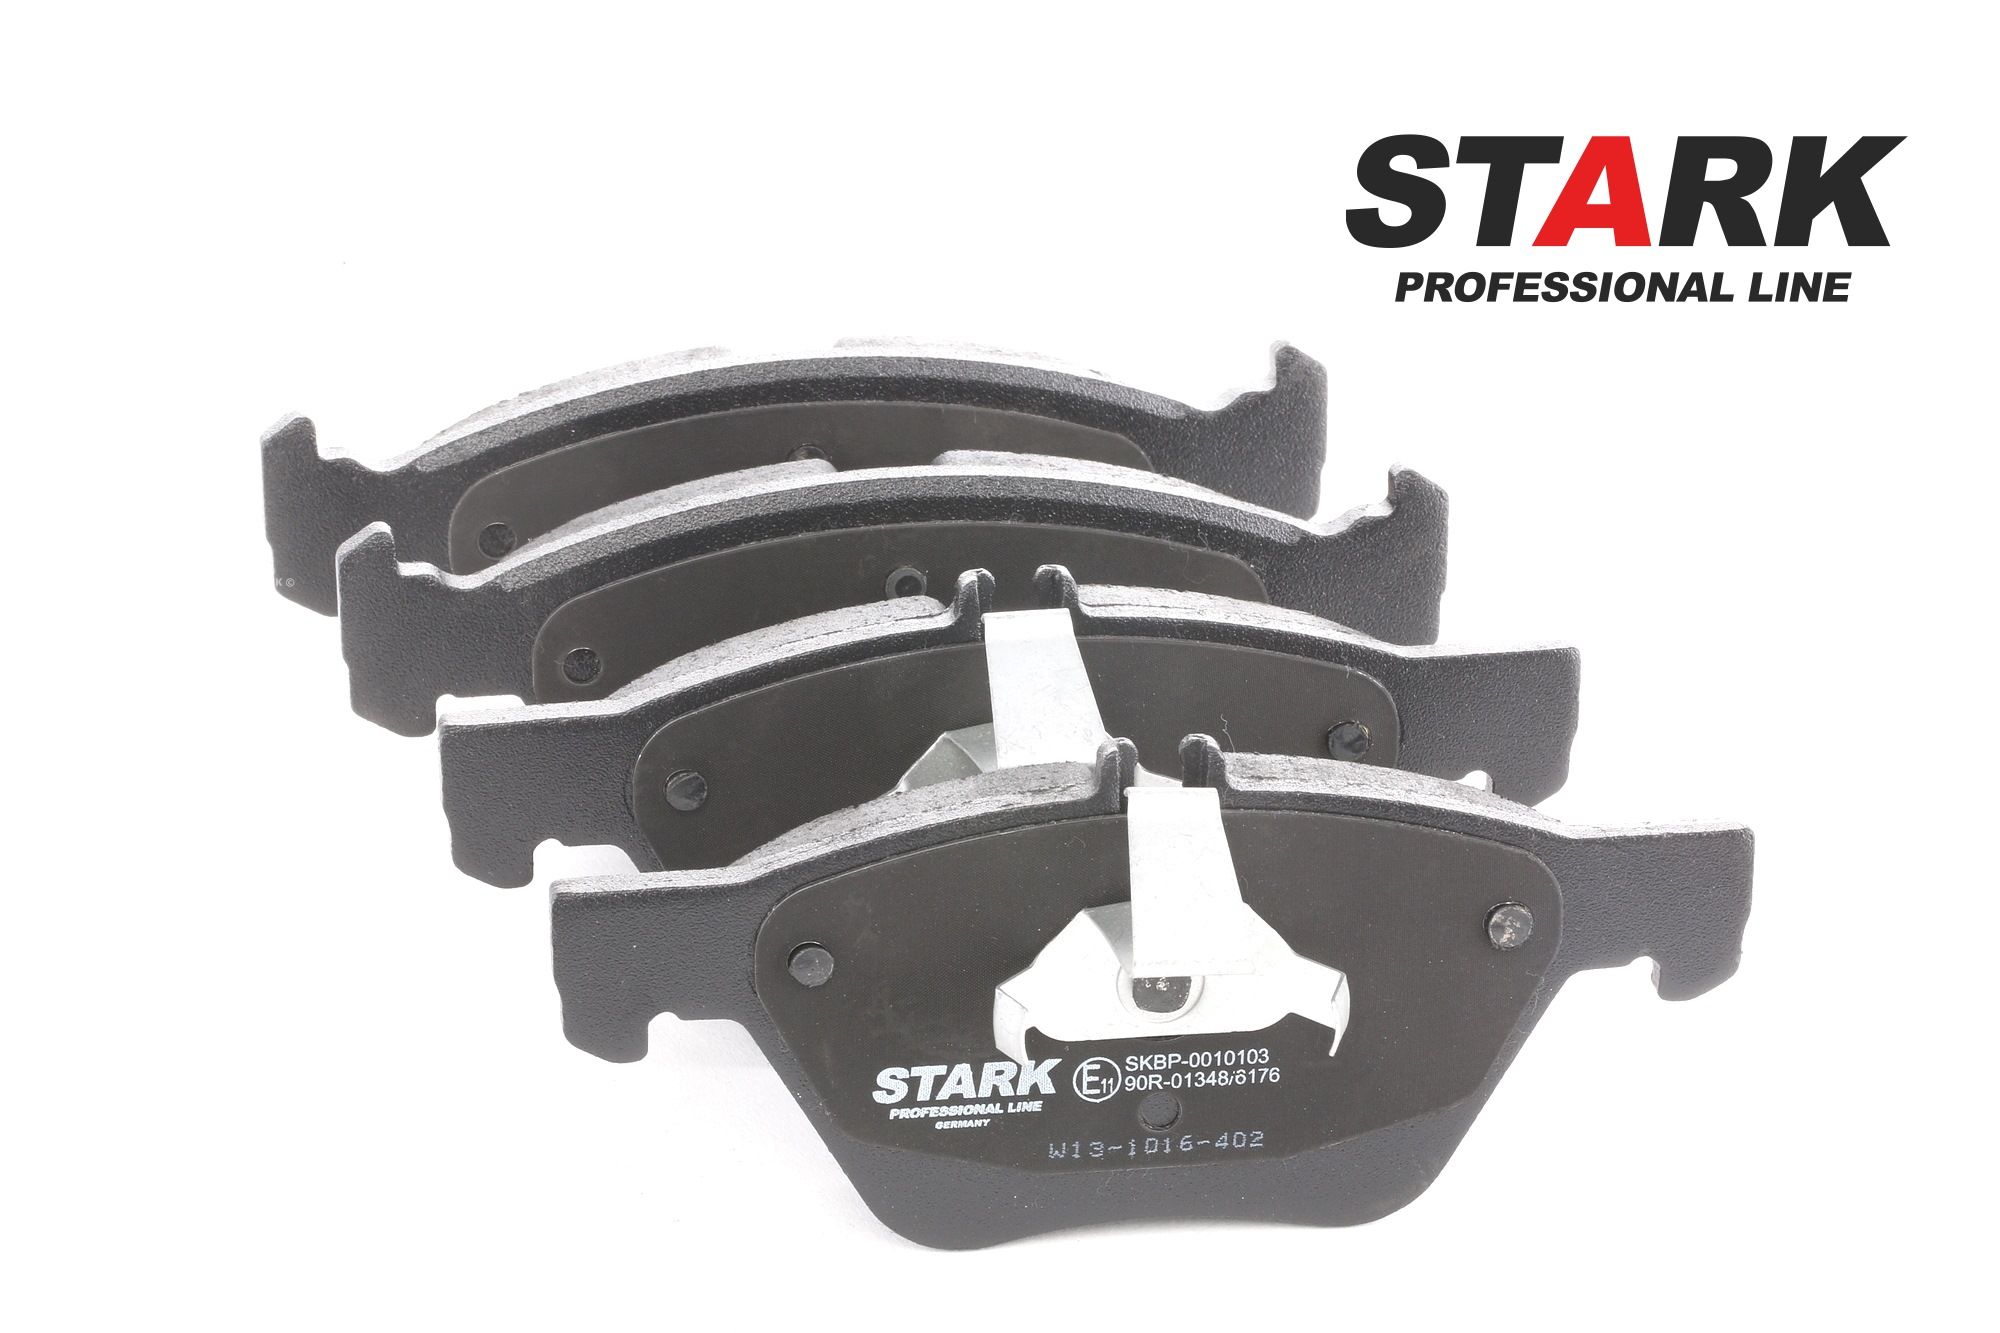 SKBP-0010103 STARK Brake pad set CHRYSLER Front Axle, prepared for wear indicator, with piston clip, with spring